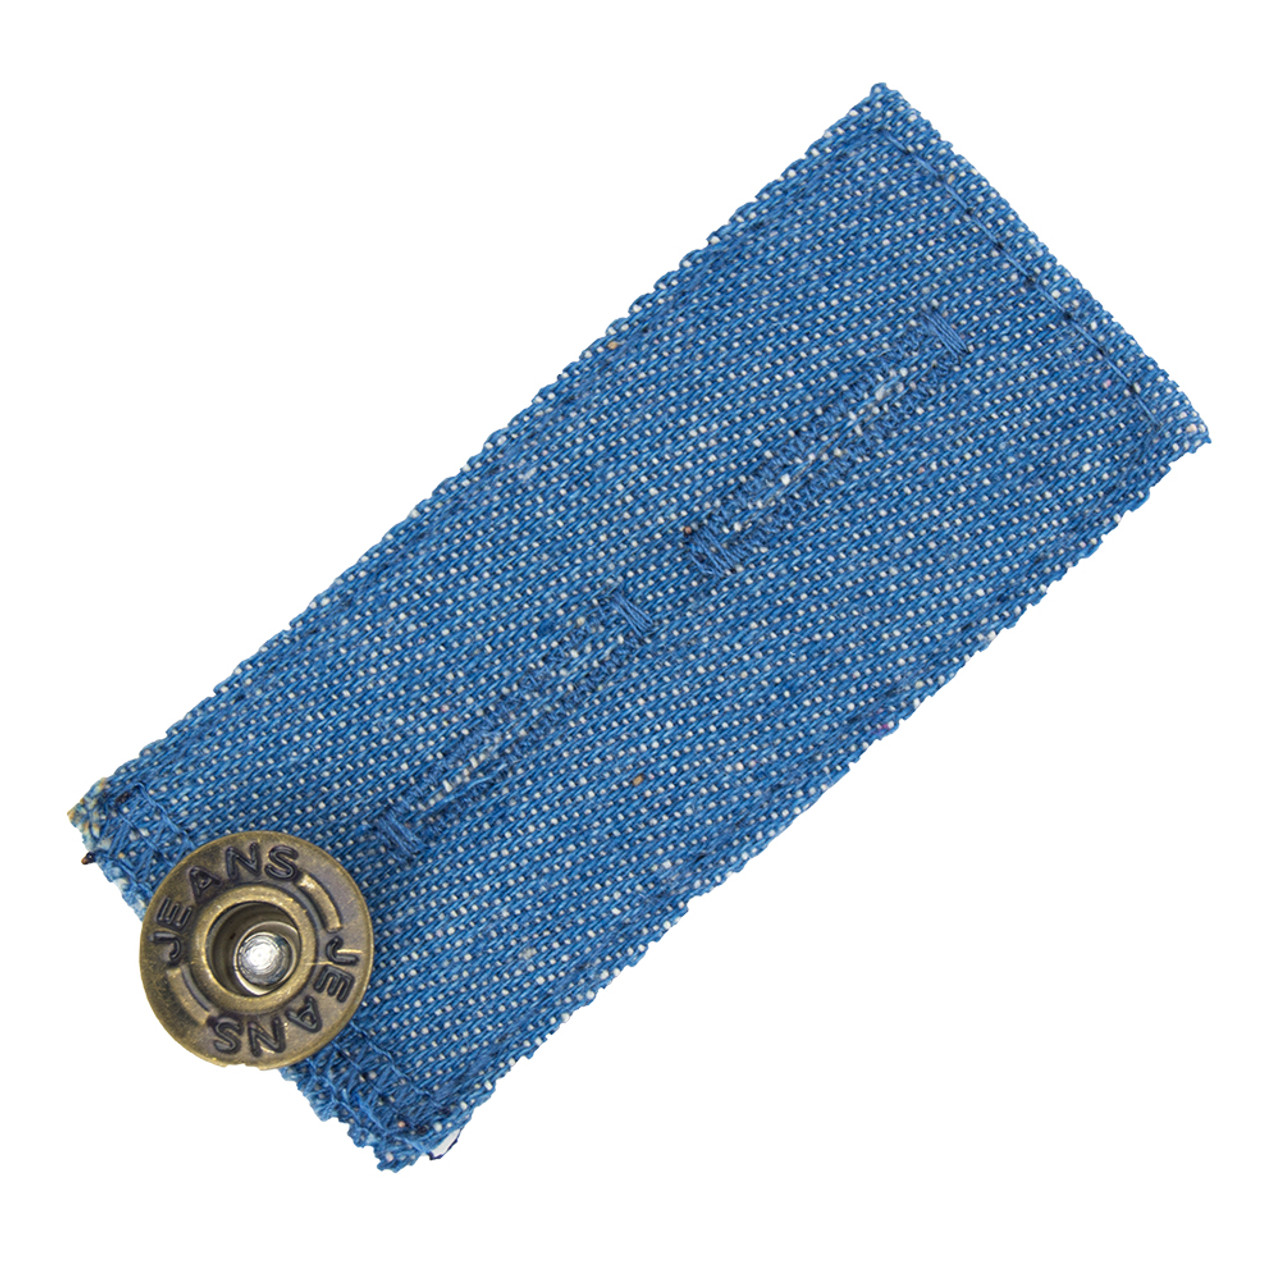 16 Pieces Jeans Waist Extender Jeans Pants Extender Blue Jean Button  Extender Waist Extender with Metal Button for Pants, Jeans, Trousers and  Skirt 